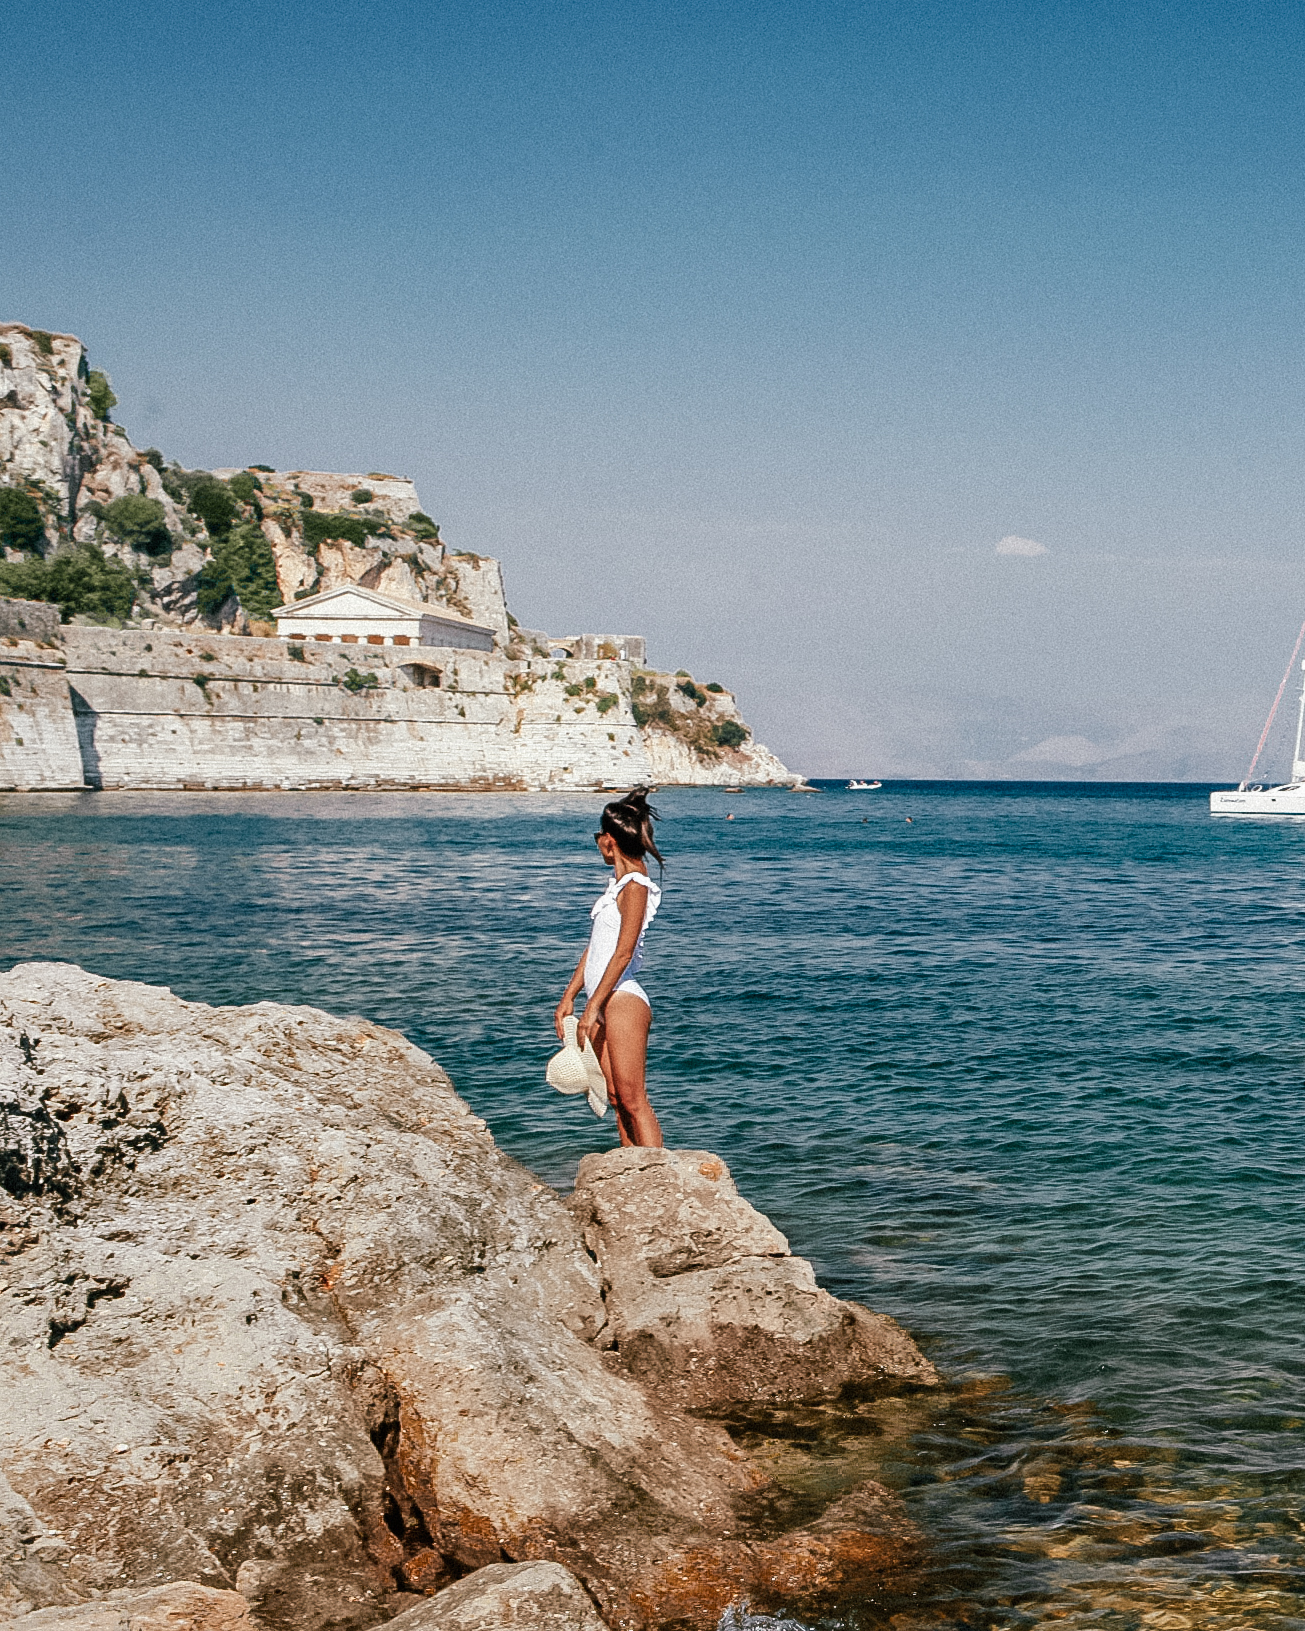 A complete travel guide to Corfu including the best beaches, cliff jumping, viewpoints, hotels, restaurants and more.